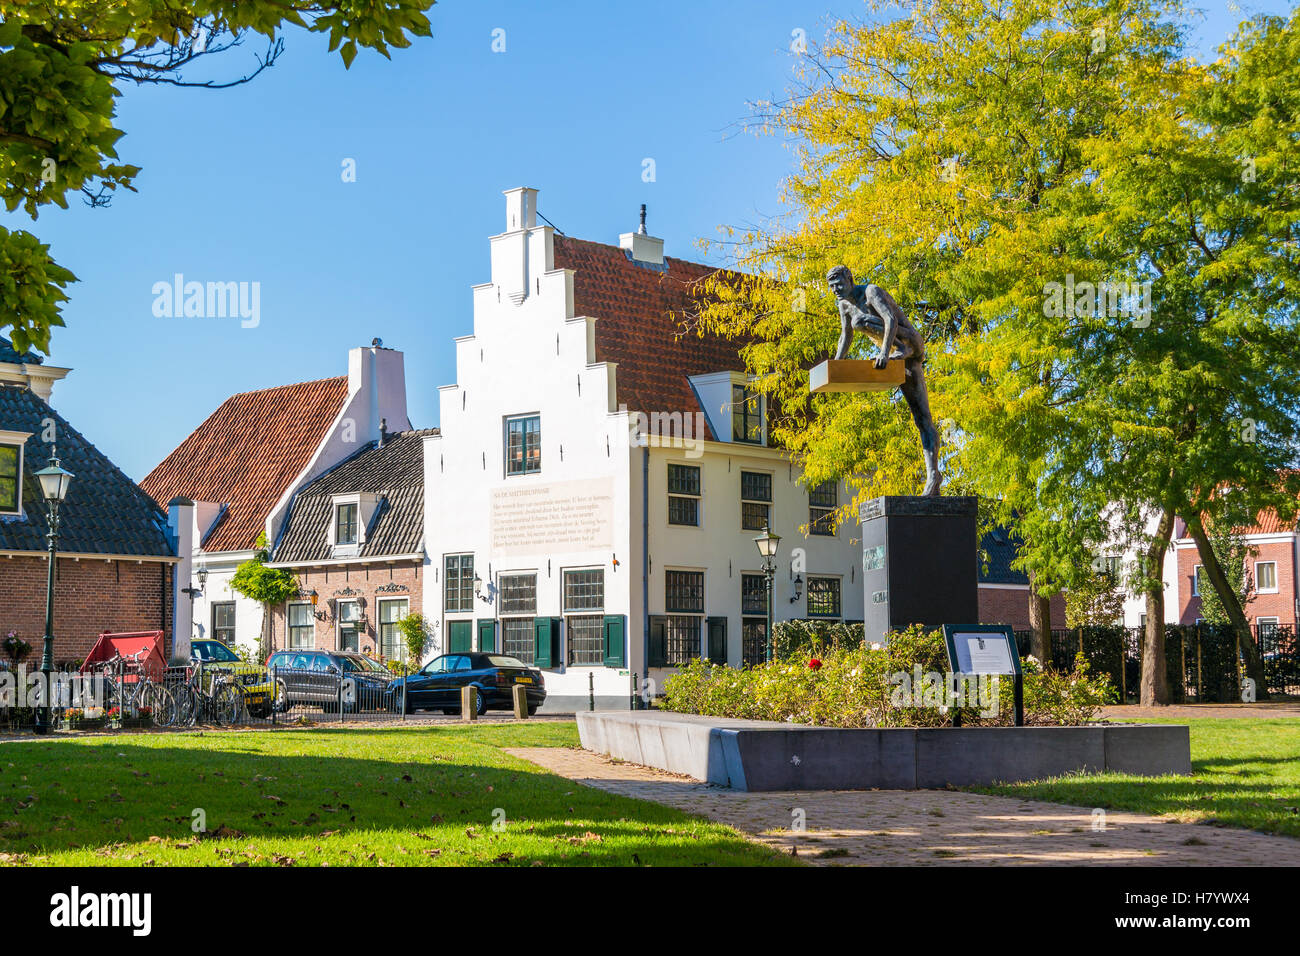 Street scene with donor memorial monument and house with stepped gable in old town of Naarden, North Holland, Netherlands Stock Photo